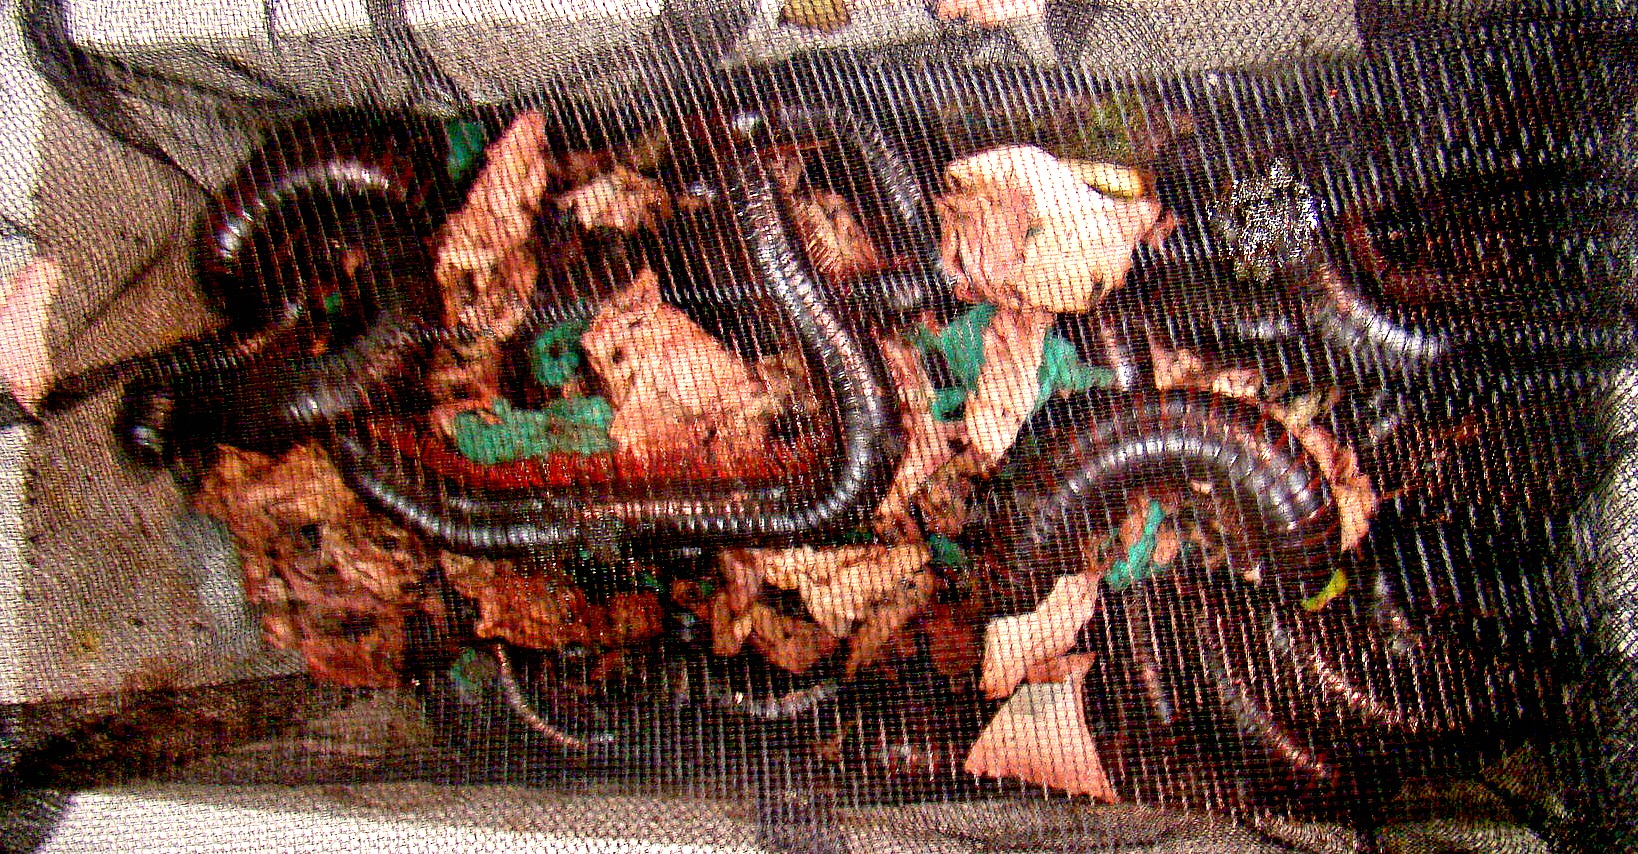 Giant millipedes in a mesh bag, discovered by customs agents at SFO. (U.S. Customs and Border Protection)